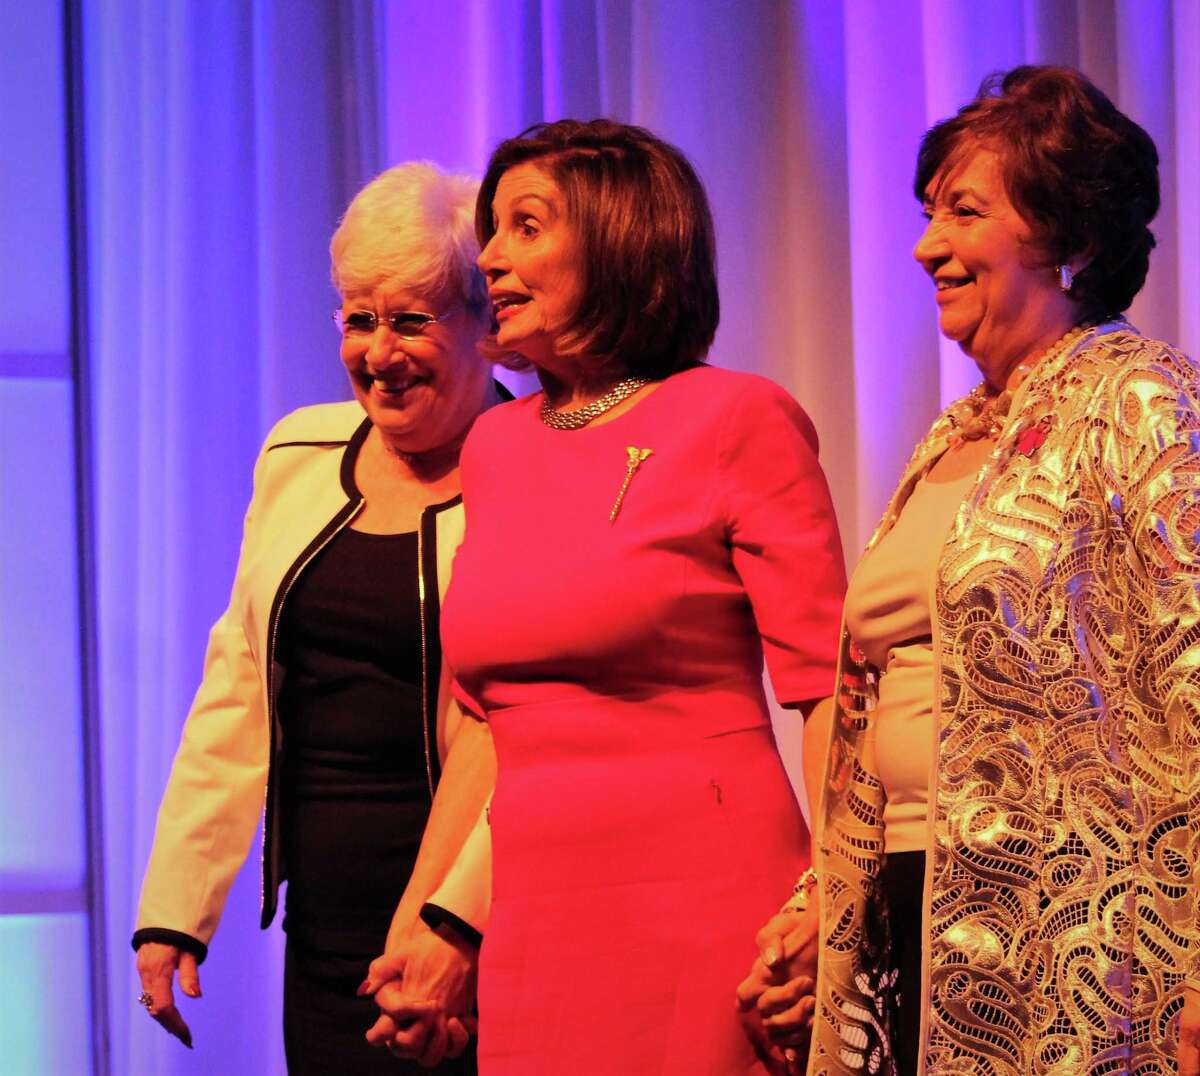 In a 2019 file photo, Nancy Wyman, then-Democratic state chairwoman, left, joined Speaker of the U.S. House Nancy Pelosi, center, and Nancy DiNardo, right, who has since returned to the head the Democratic State Central Committee.